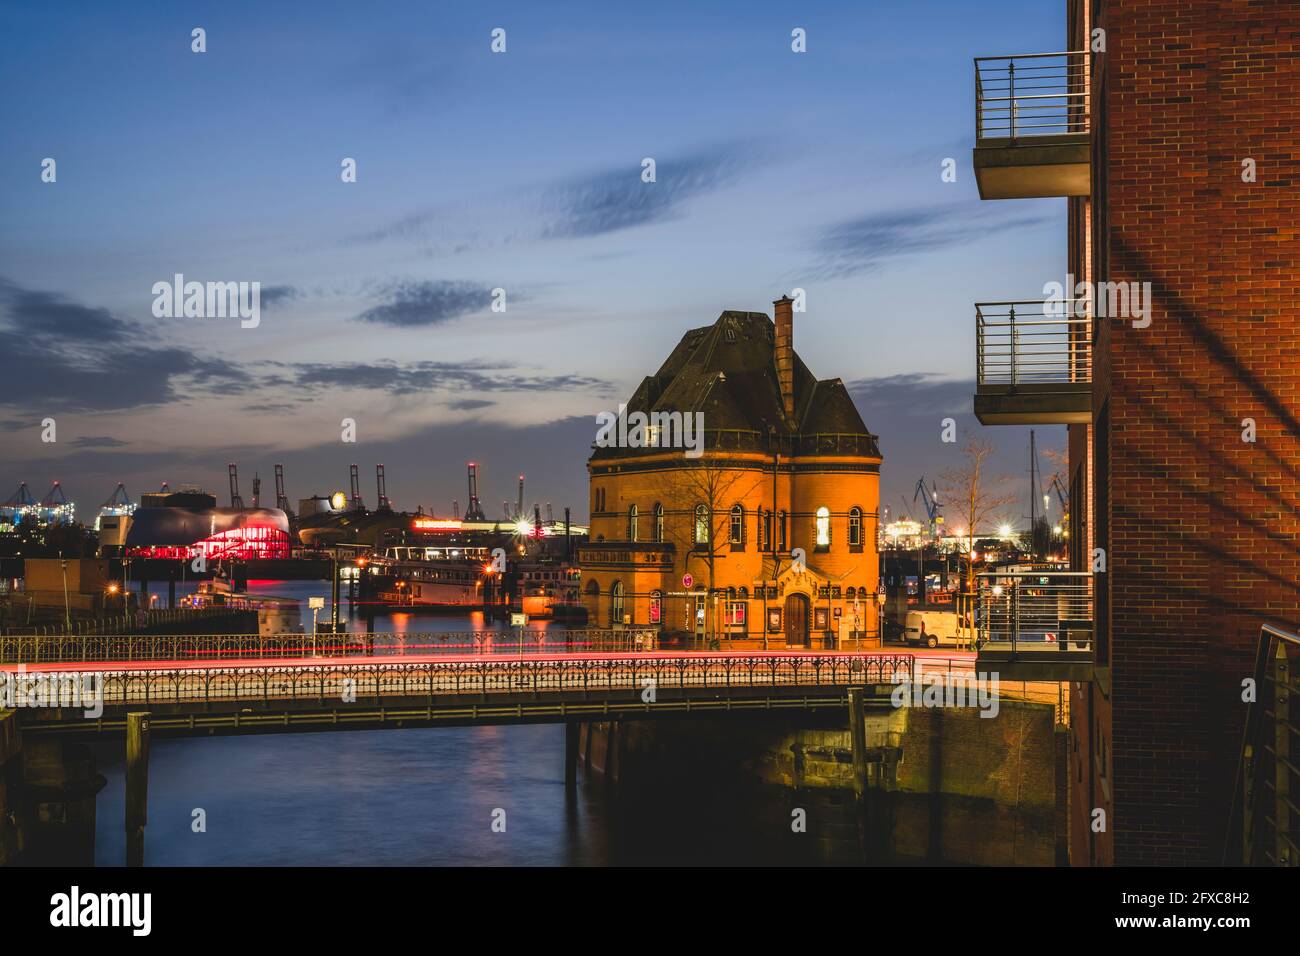 Germany, Hamburg, Water police builidng in Speicherstadt at dusk Stock Photo